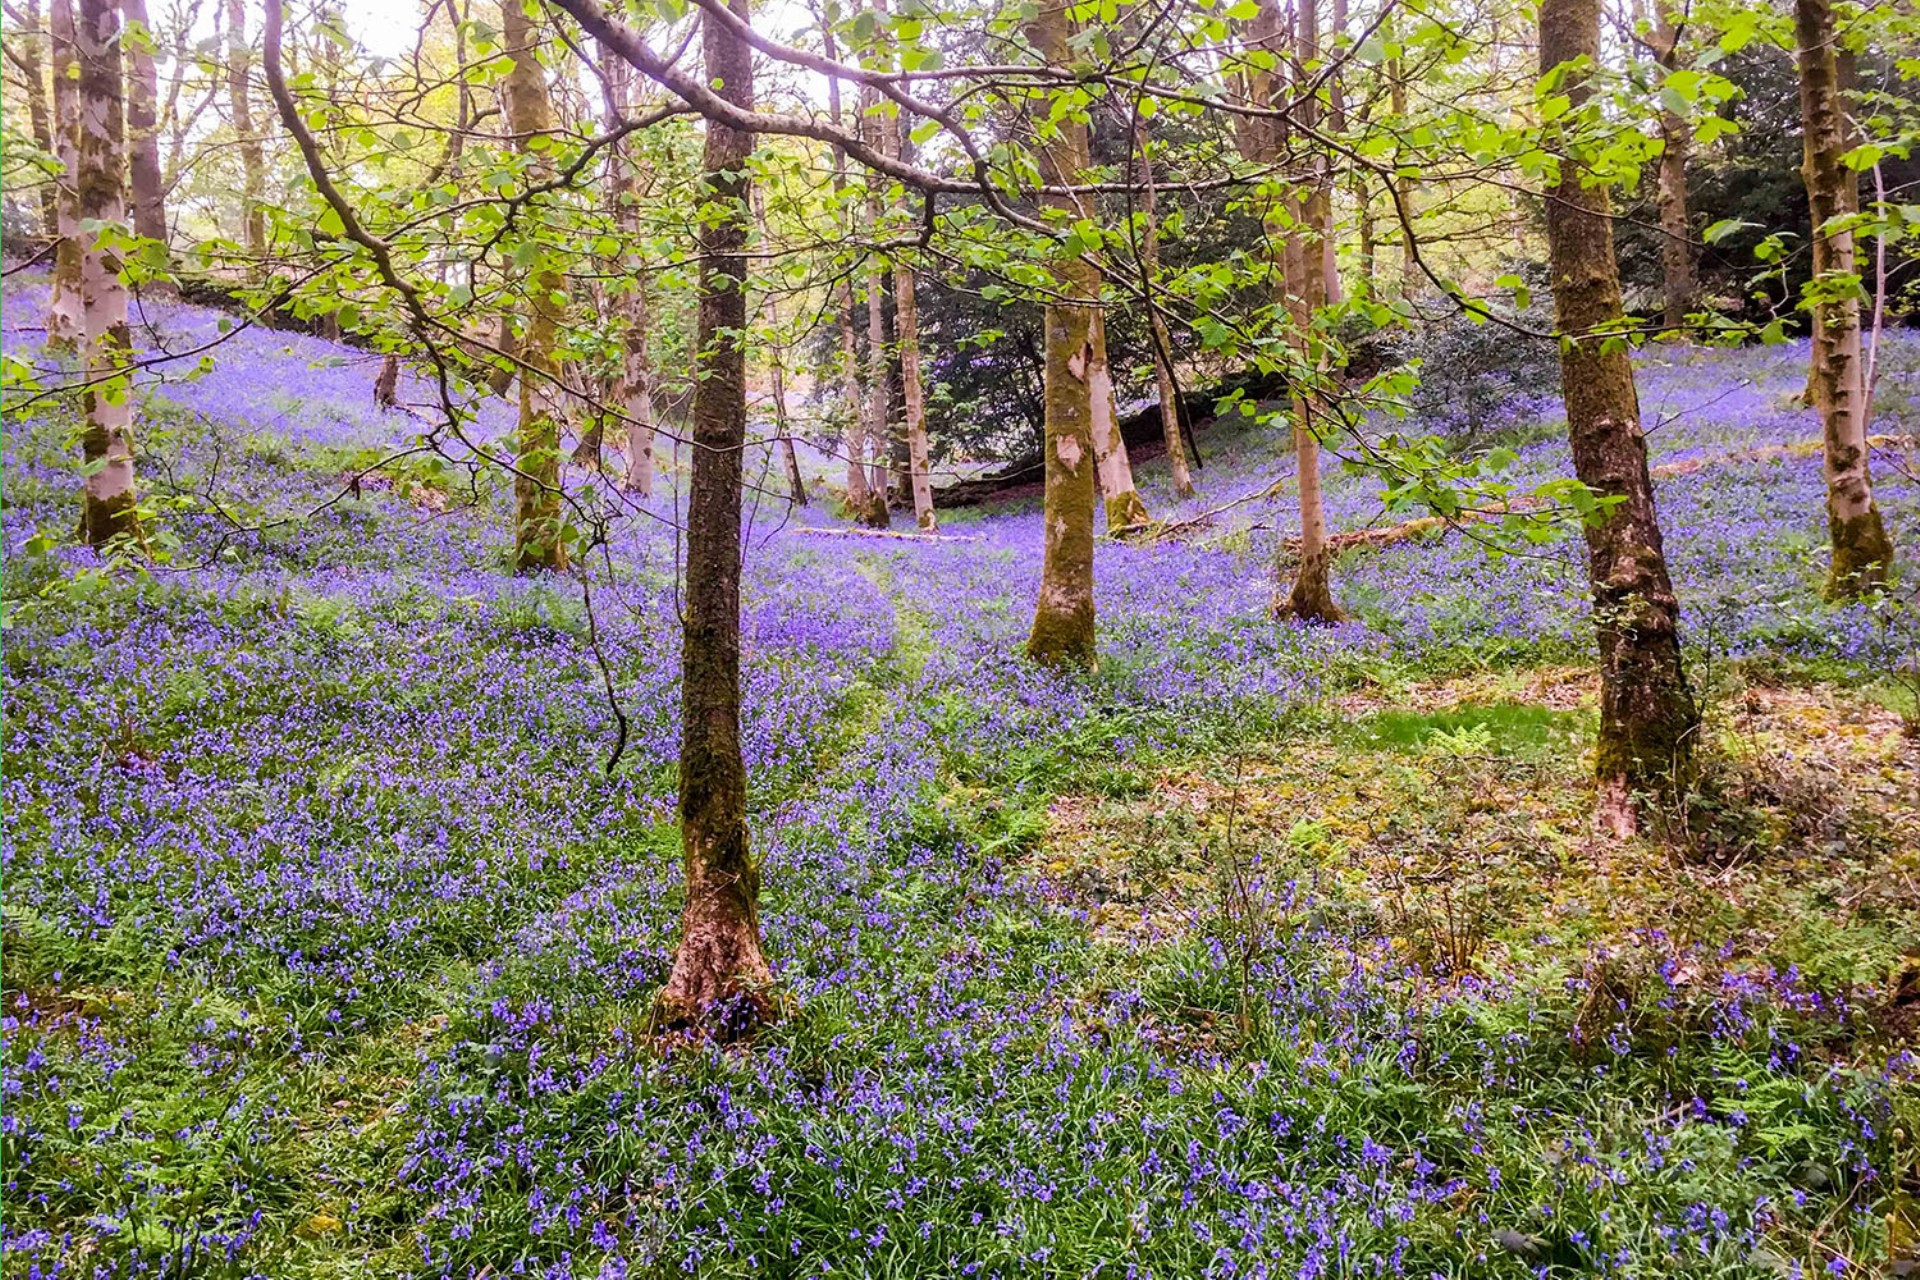 <p>If you're visiting the Lake District in May, one of the most enchanting sights is the appearance of clouds of bluebells carpeting the woodlands.